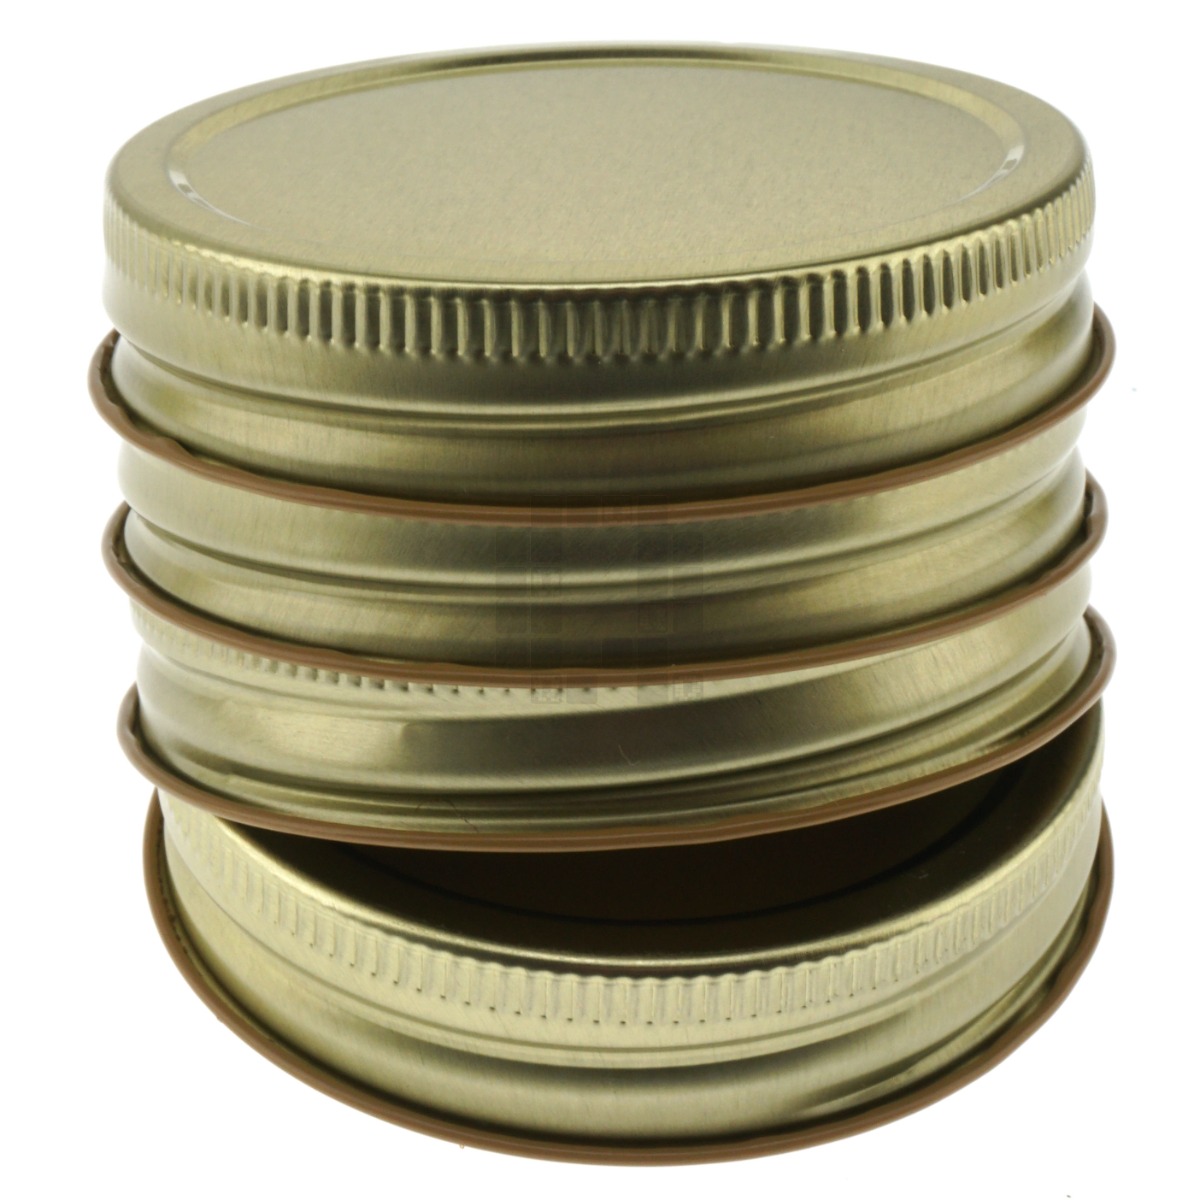 Flat Top Screw-On One Piece Regular Mouth Jar Lids, Pack of 4